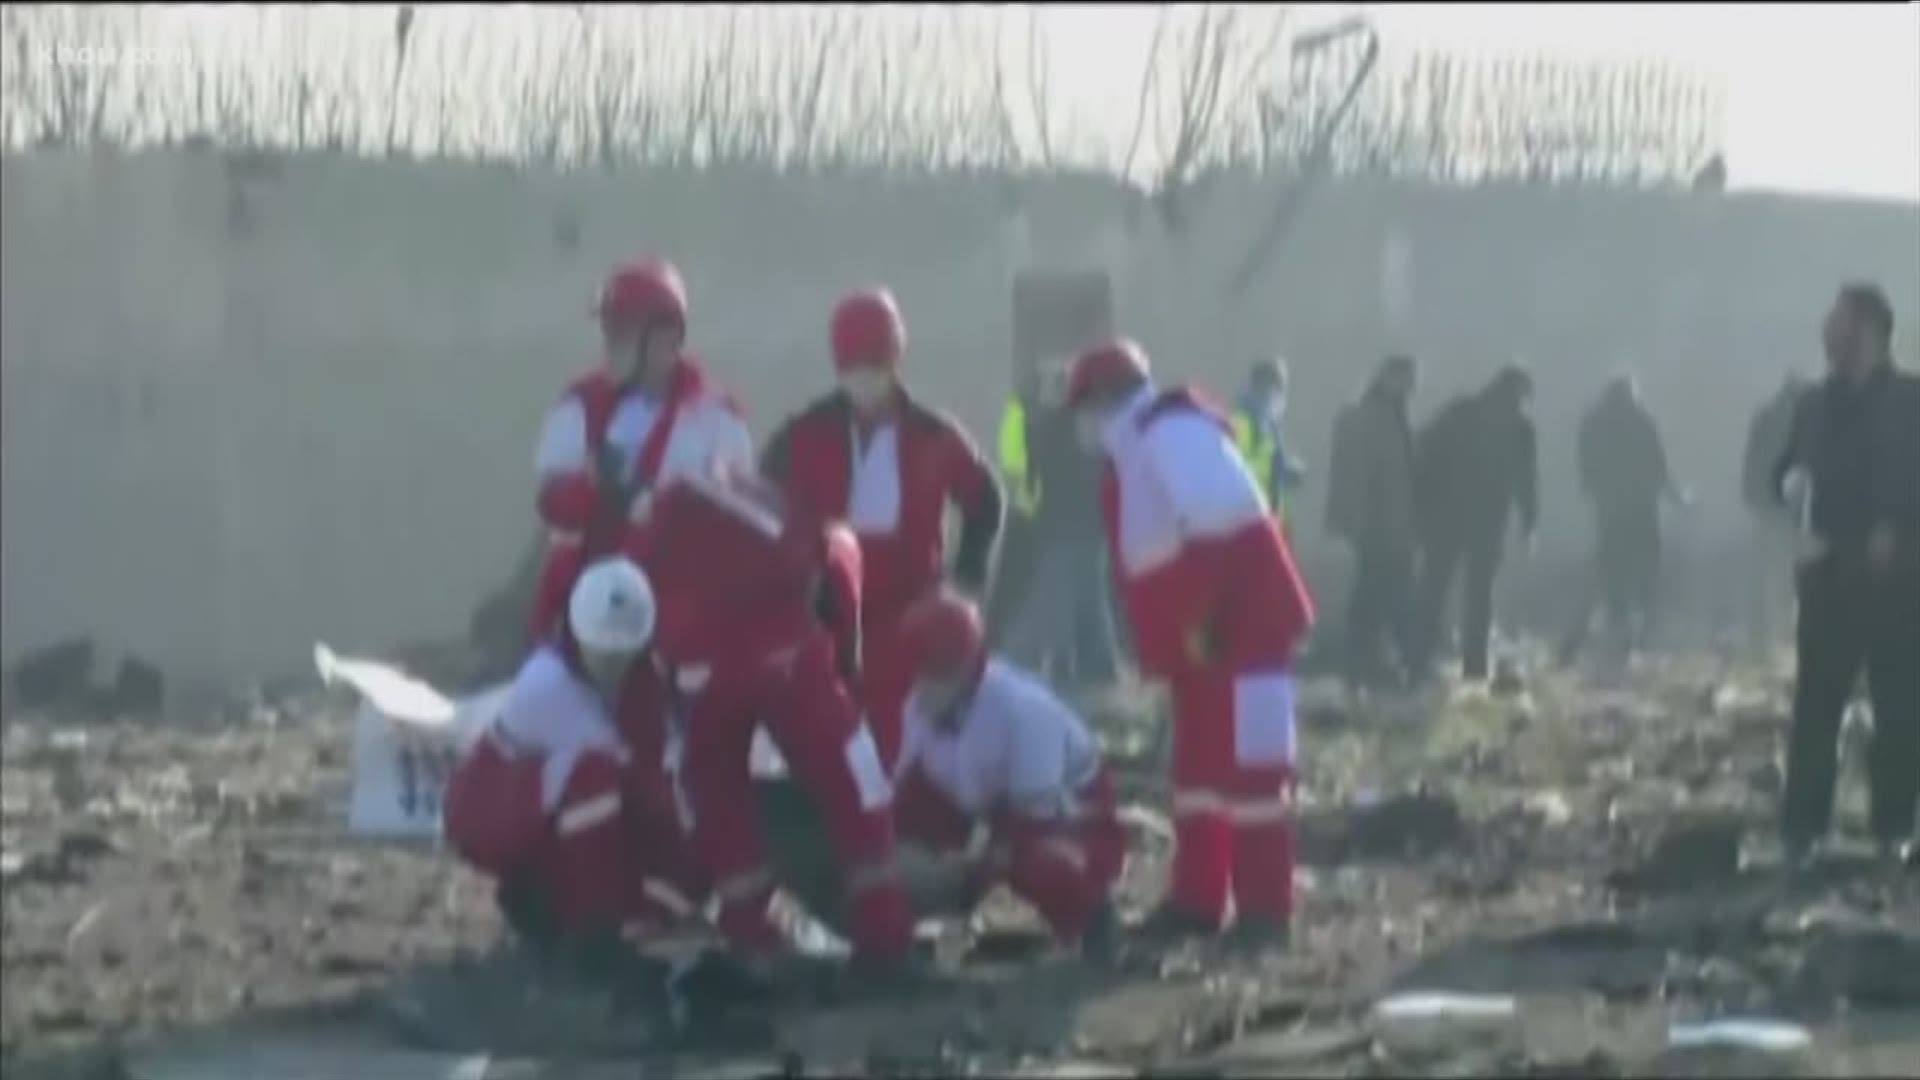 U.S. officials believe Iran shot down a Ukranian airliner that crashed Wednesday.